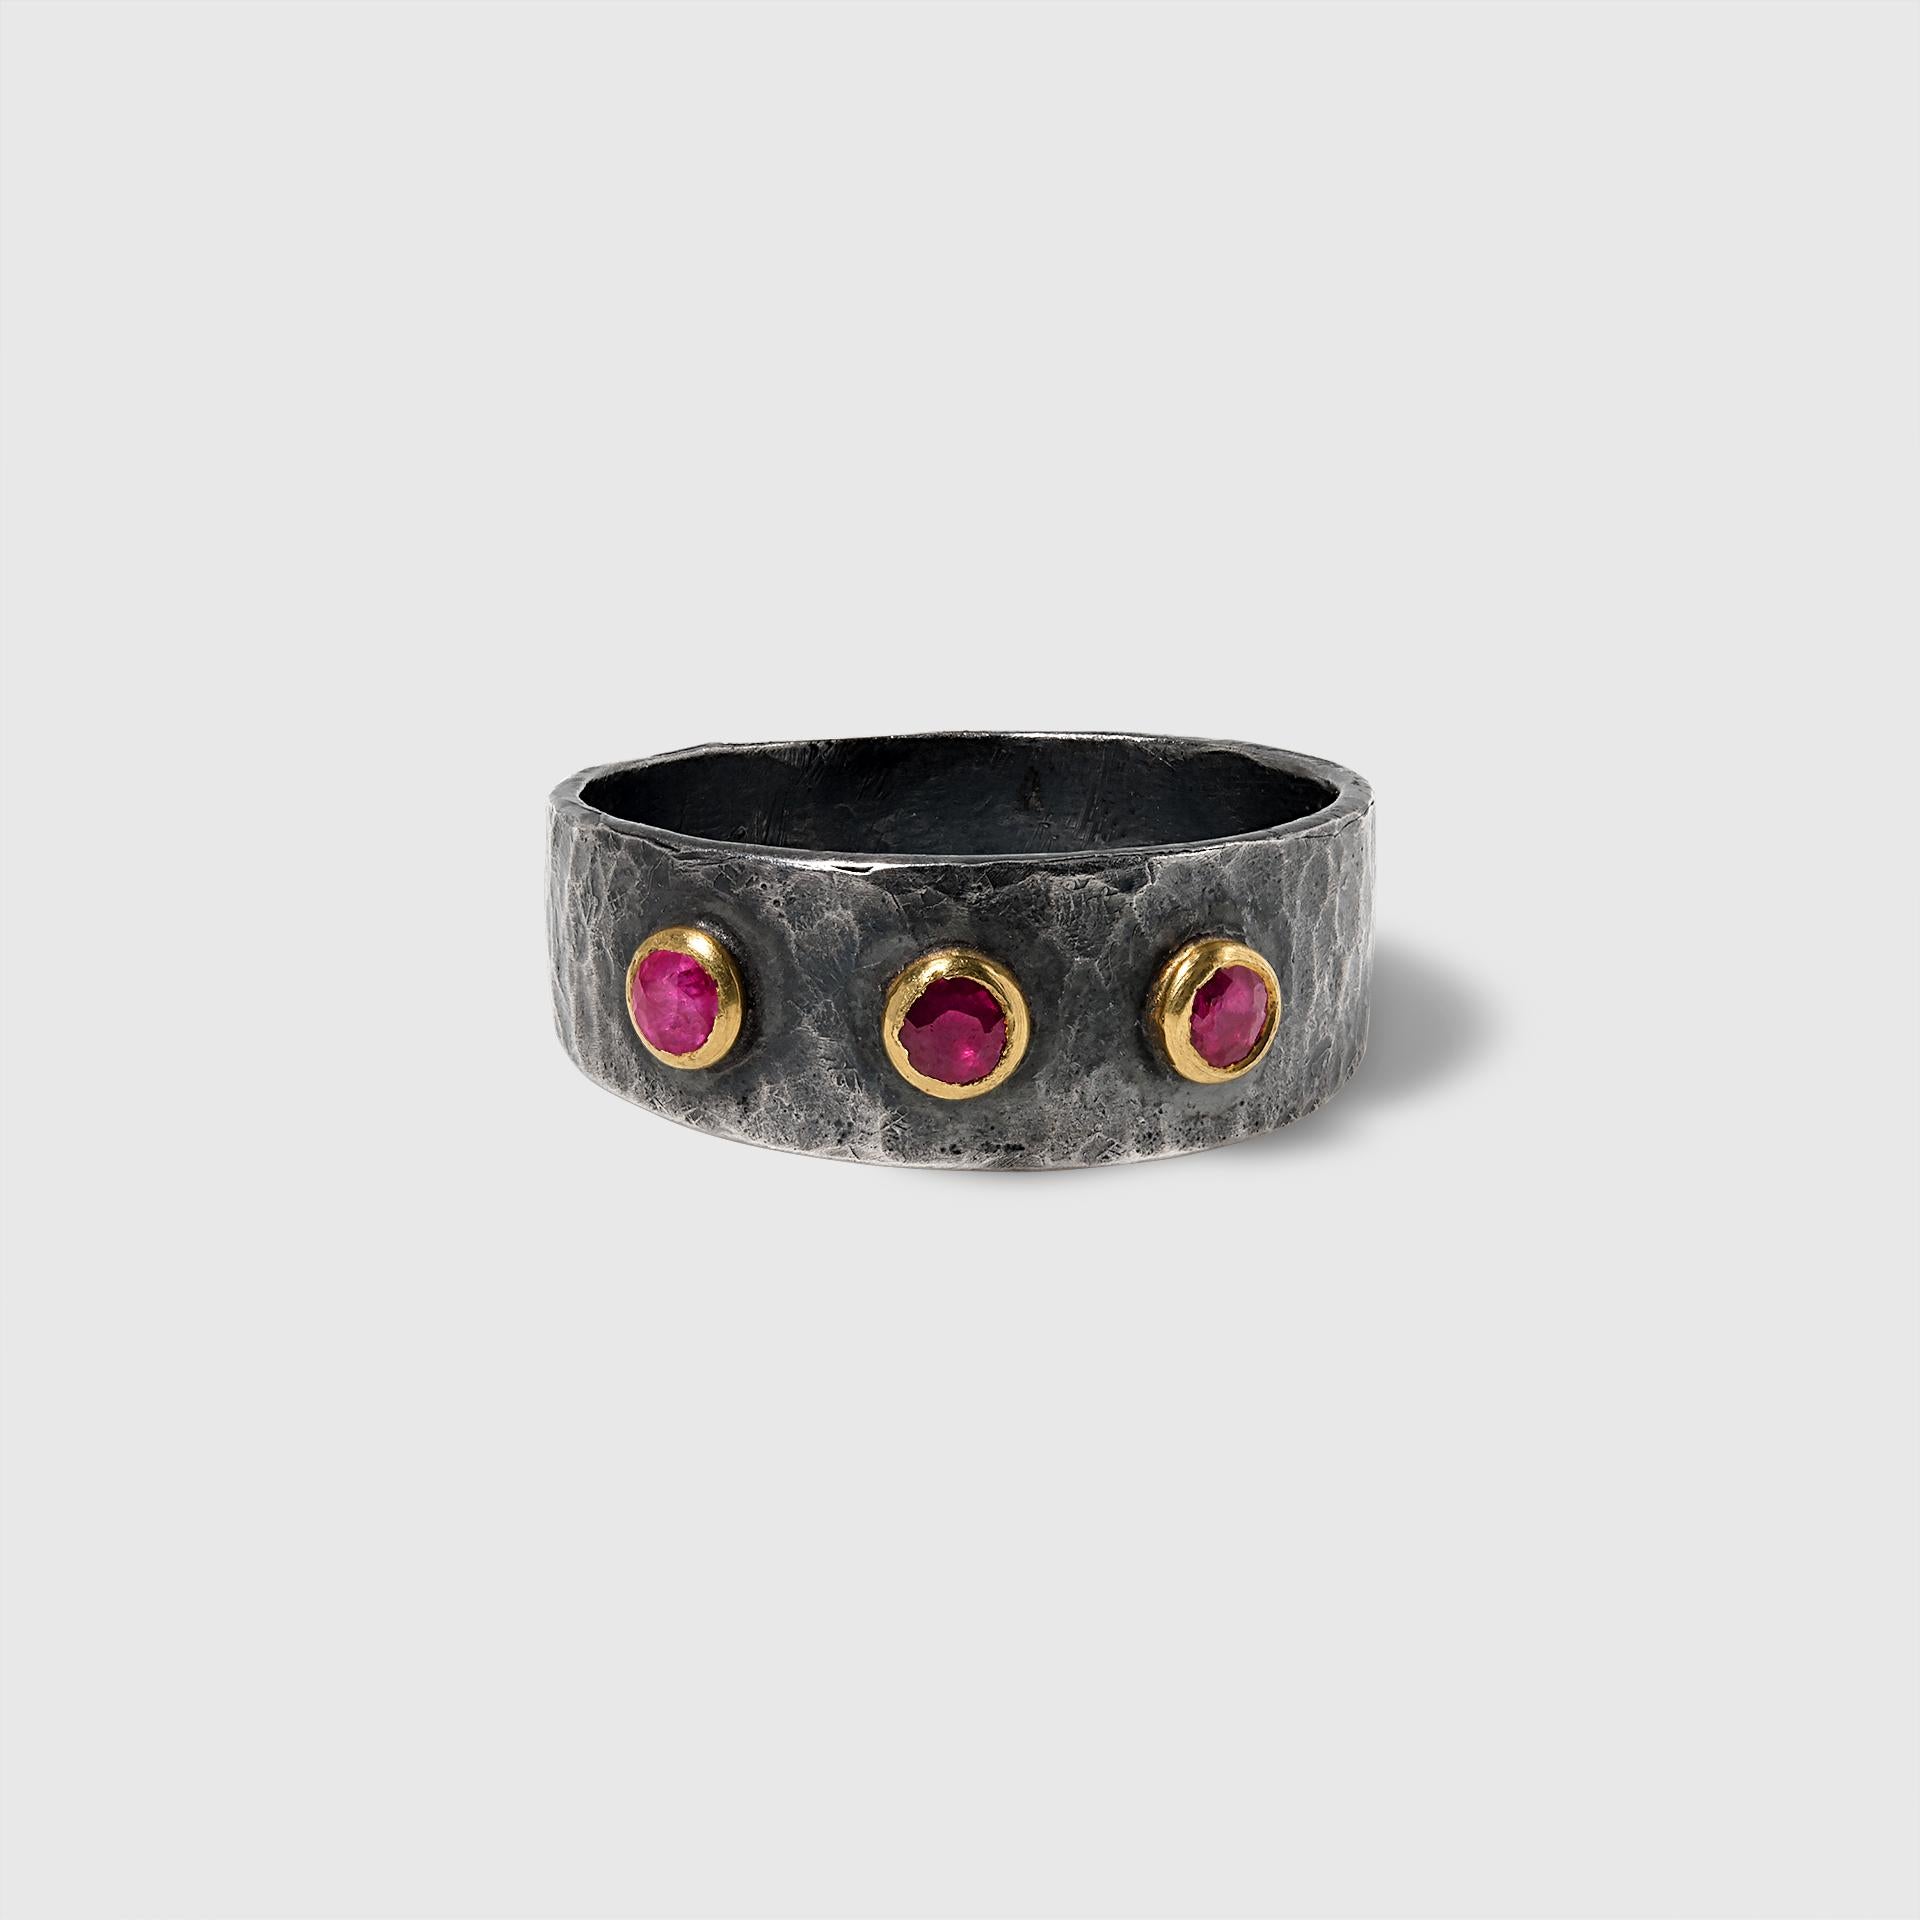 Triple Ruby, 24K and Silver Ring by Prehistoric Works of Istanbul, Turkey

24K Gold, G995 - 0.21 grams
Sterling silver, S925 - 3.12 grams
Ruby - 0.20 carats